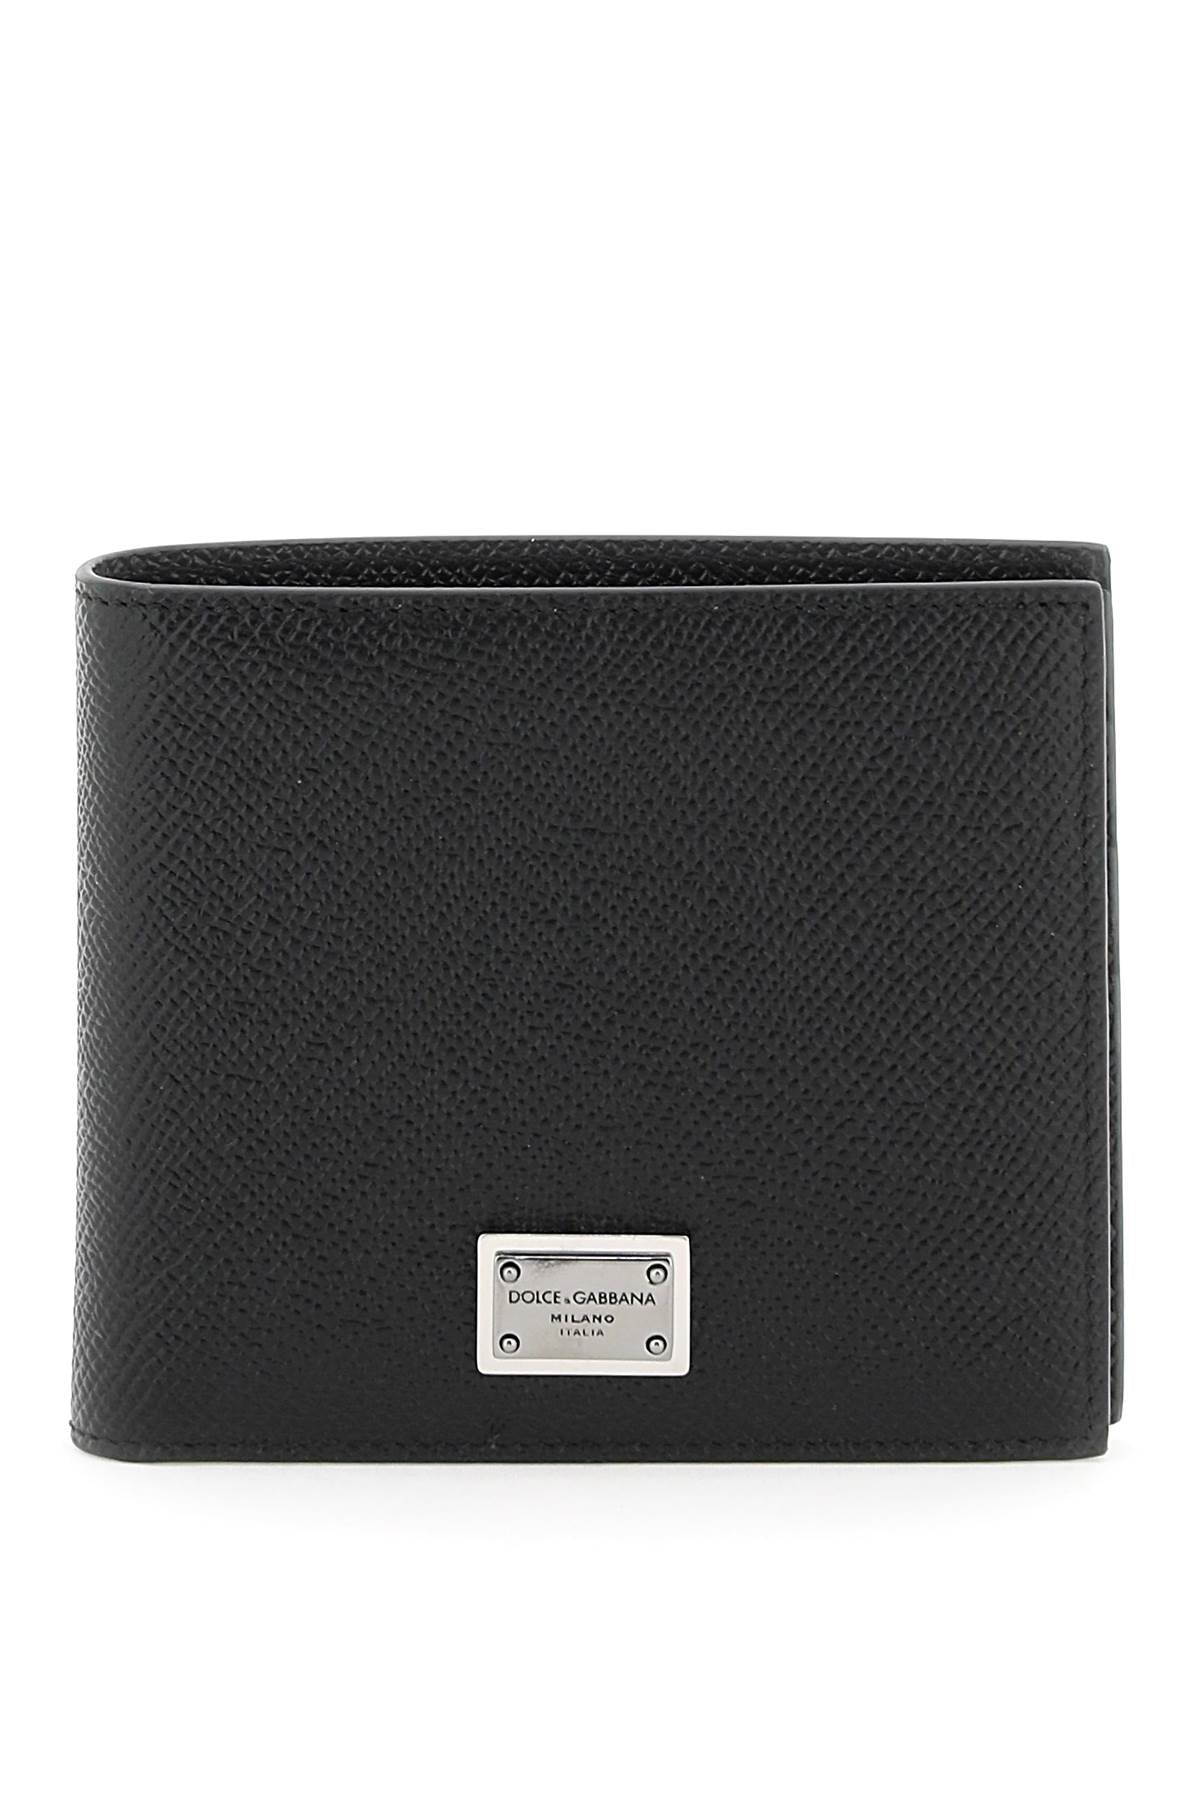 Dolce & gabbana leather wallet-0